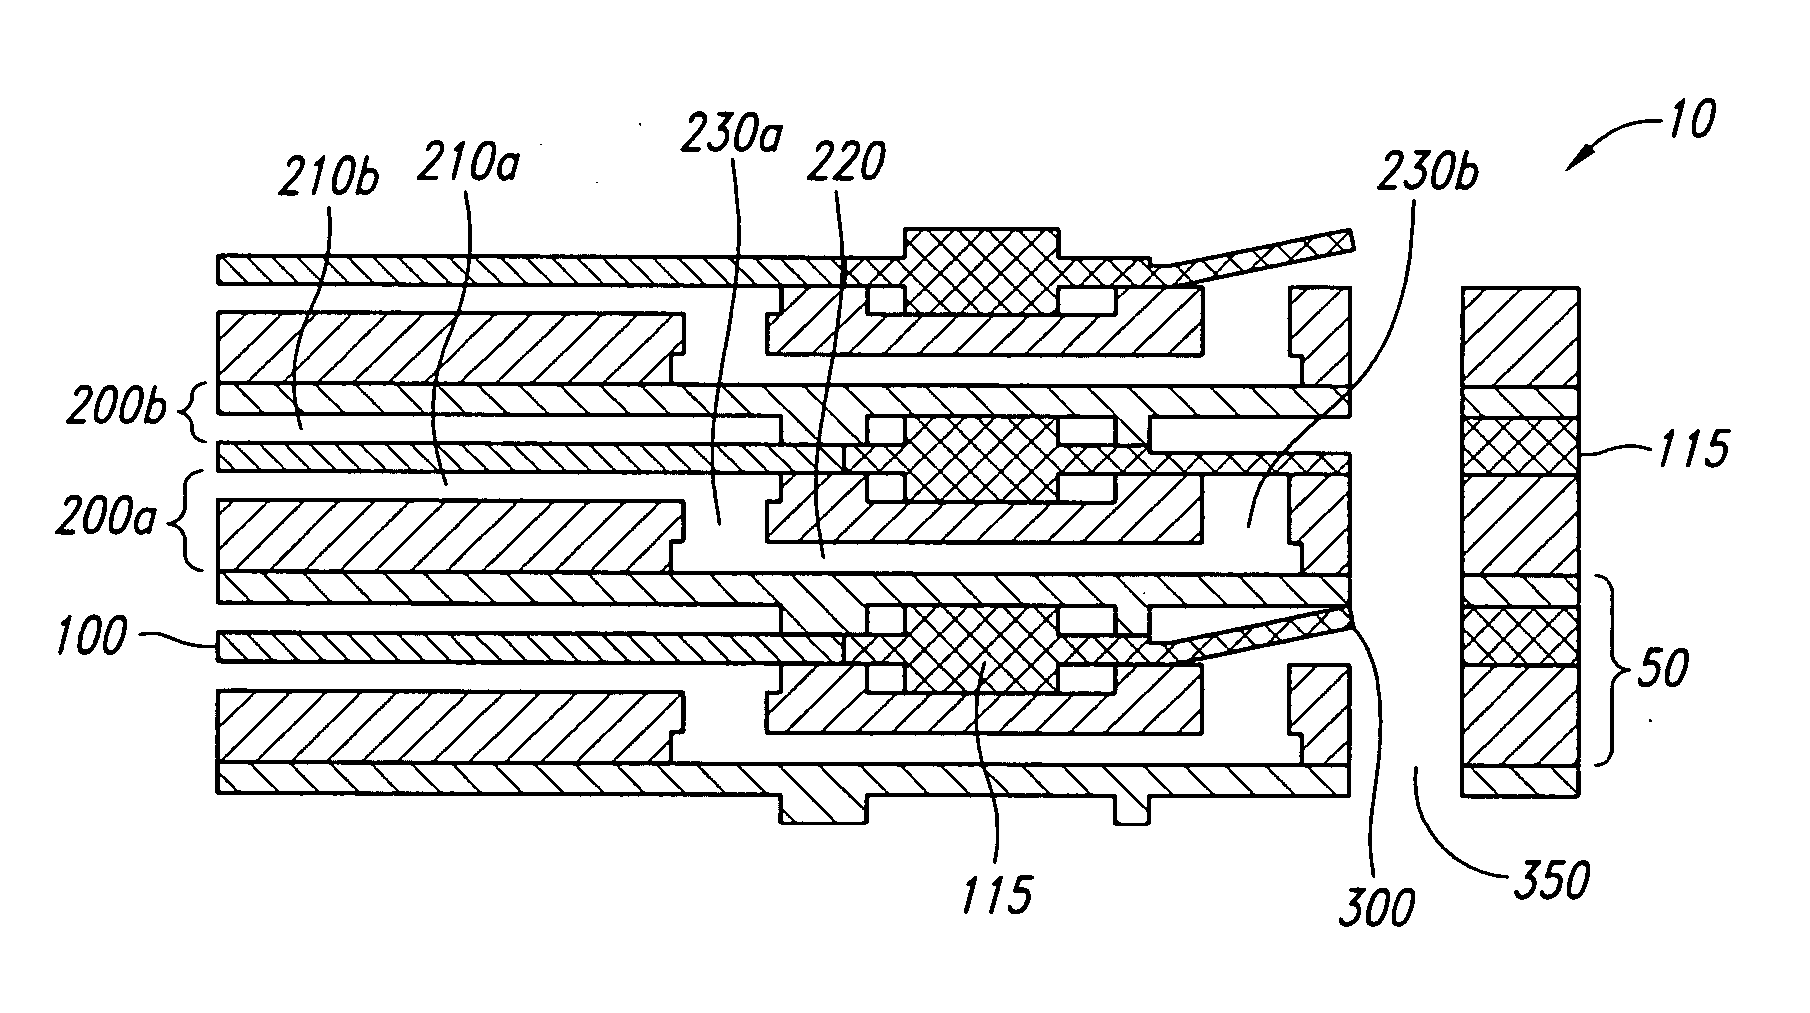 Electrochemical fuel cell stack with integrated anode exhaust valves